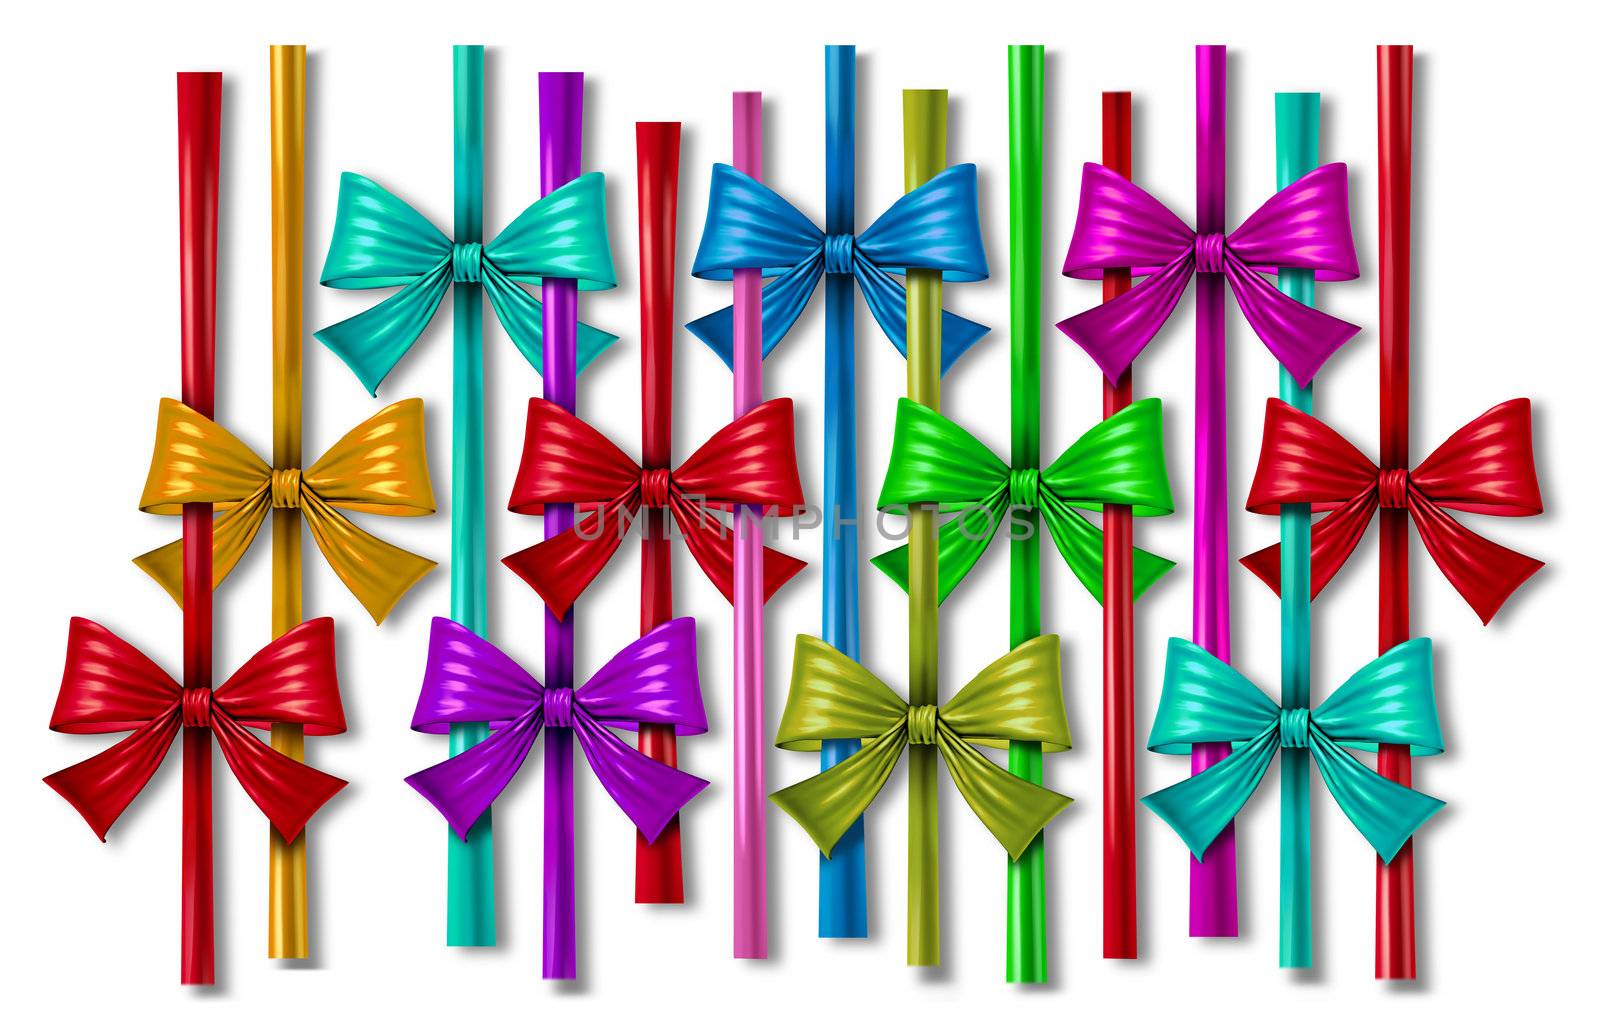 Ribbon Bow Design Element by brightsource